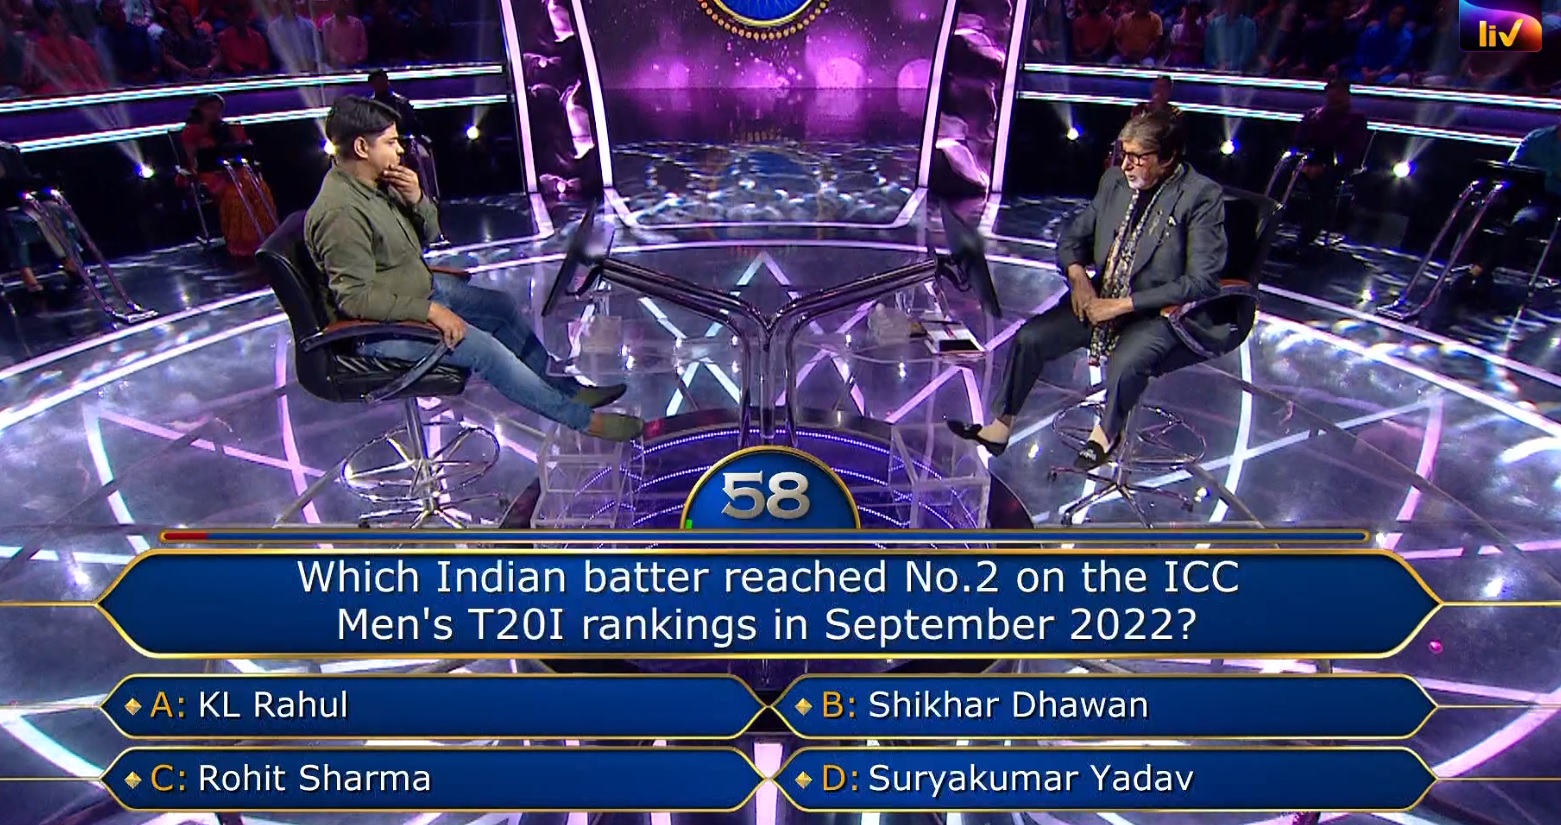 Ques : Which Indian batter reached No.2 on the ICC Men’s T20I rankings in September 2022?